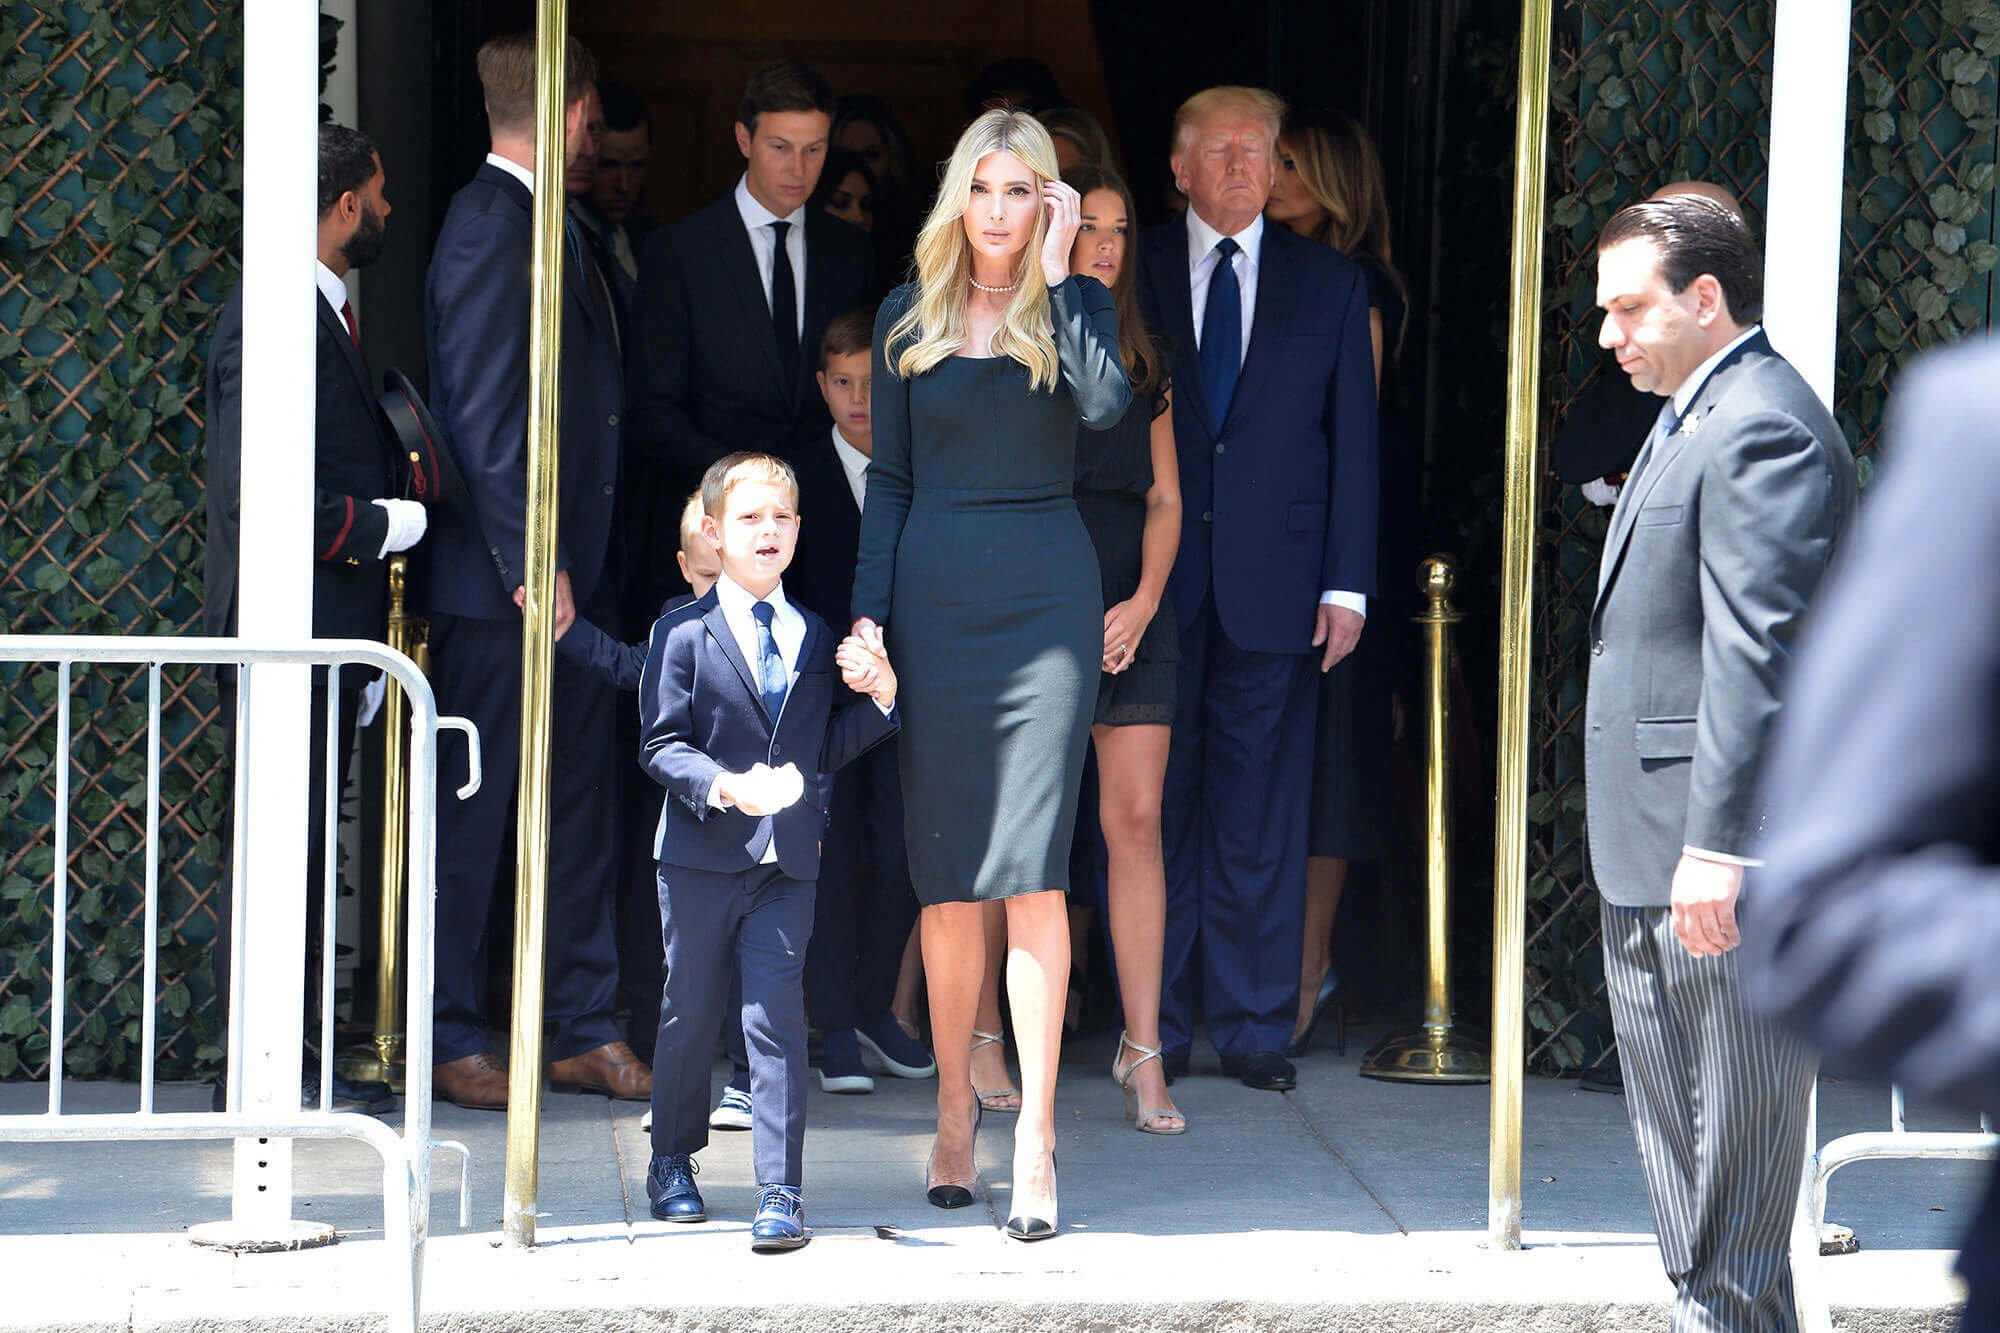 Members of the Trump family prepare to depart for St. Vincent Ferrer Catholic Church.